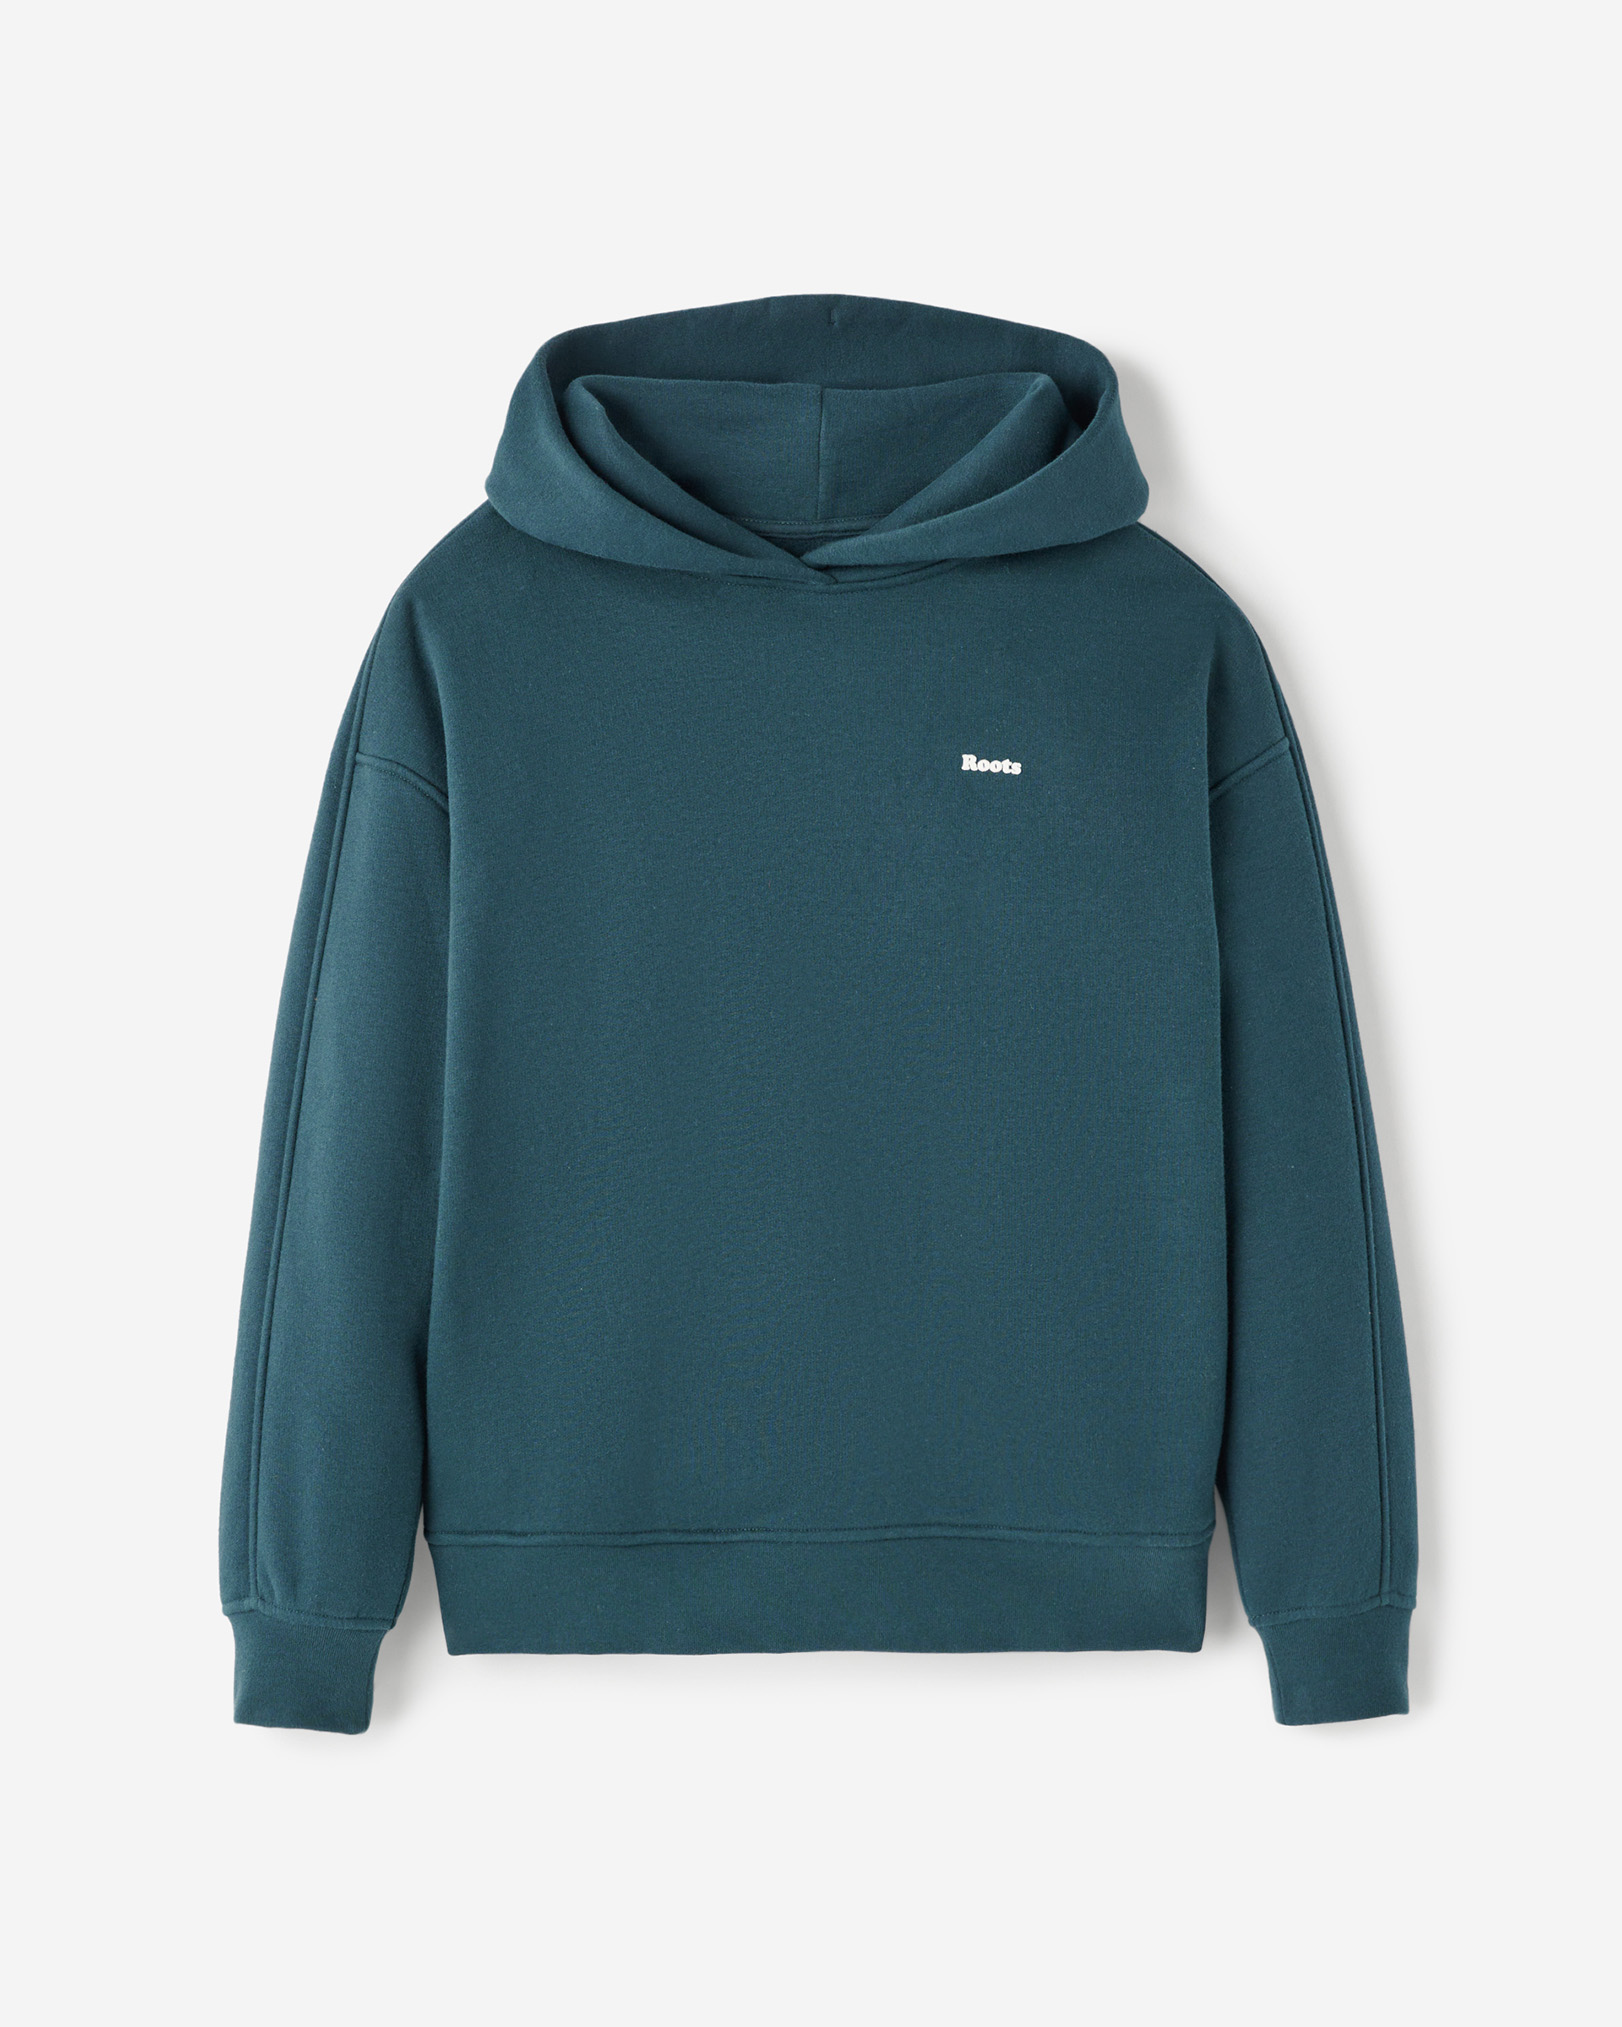 Roots Cloud Hoodie in Forest Teal